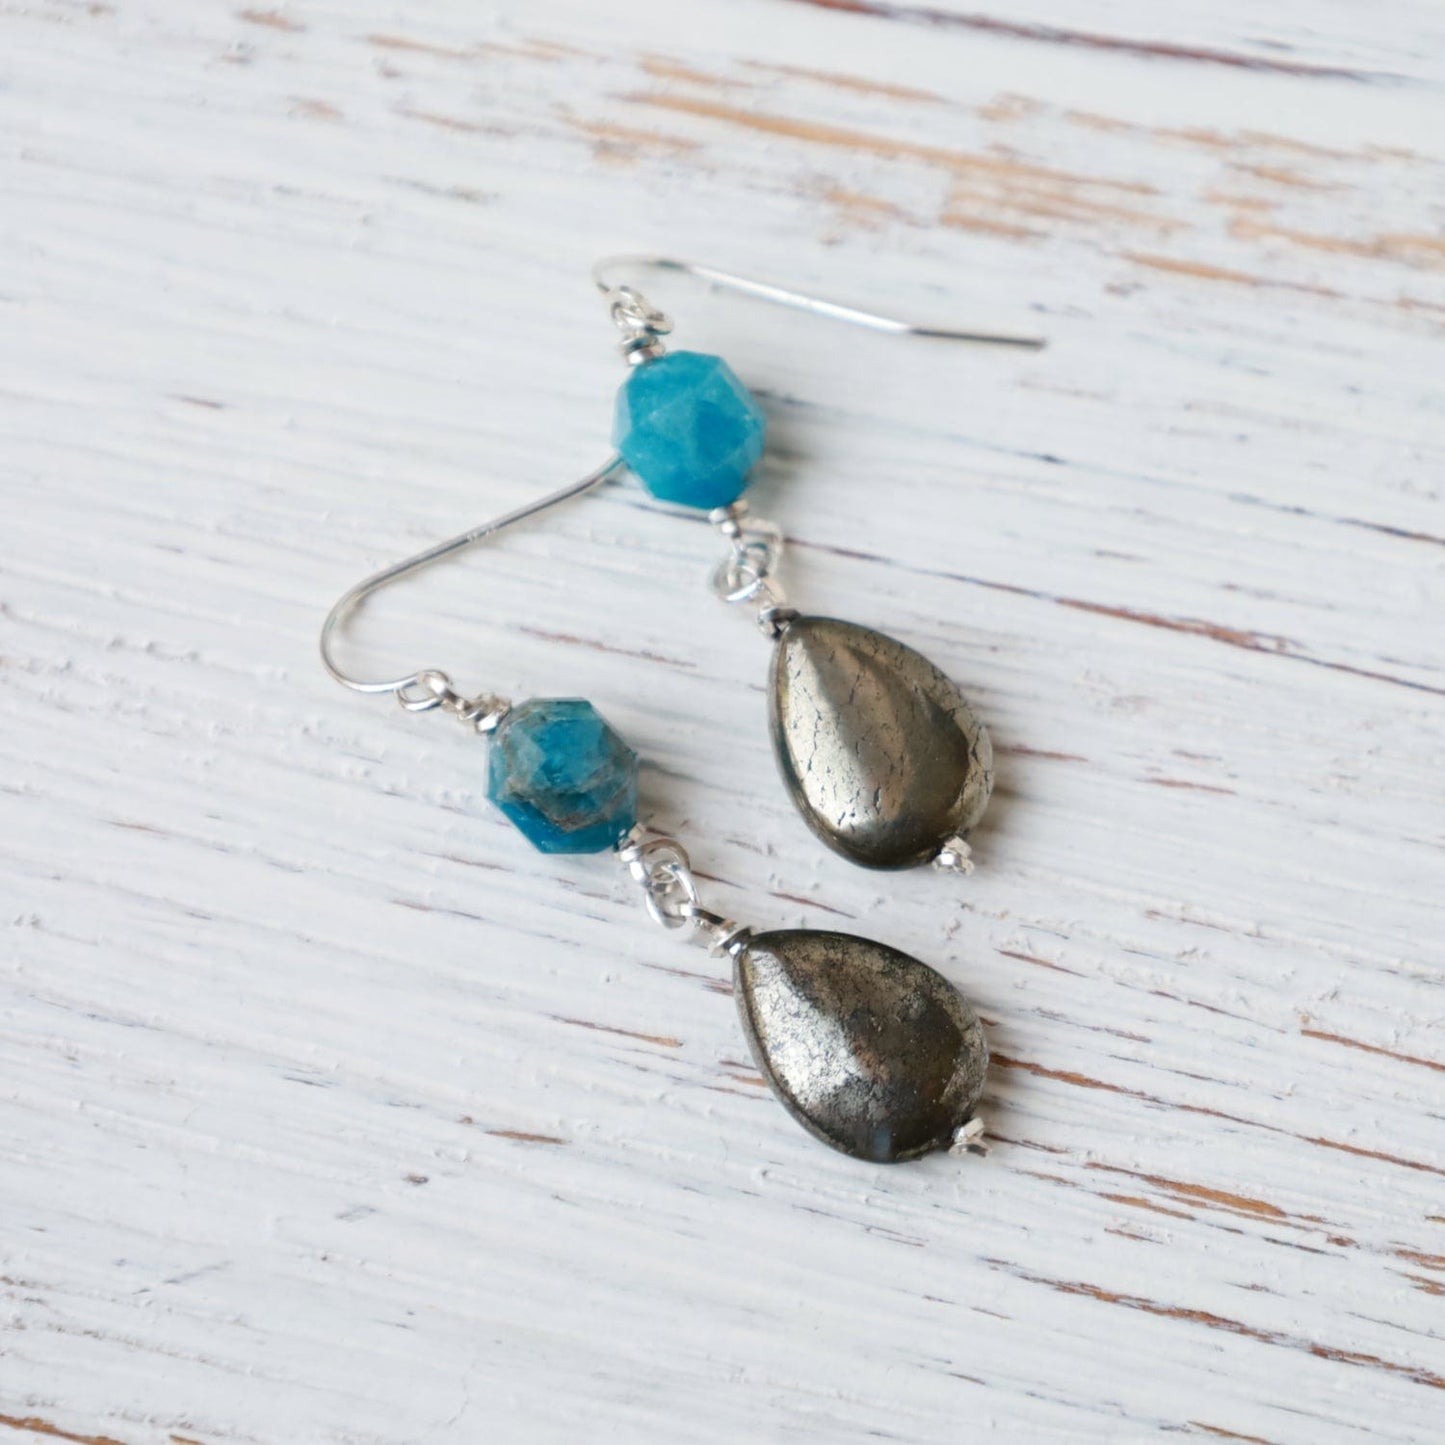 EAR Apatite and Pyrite Earring